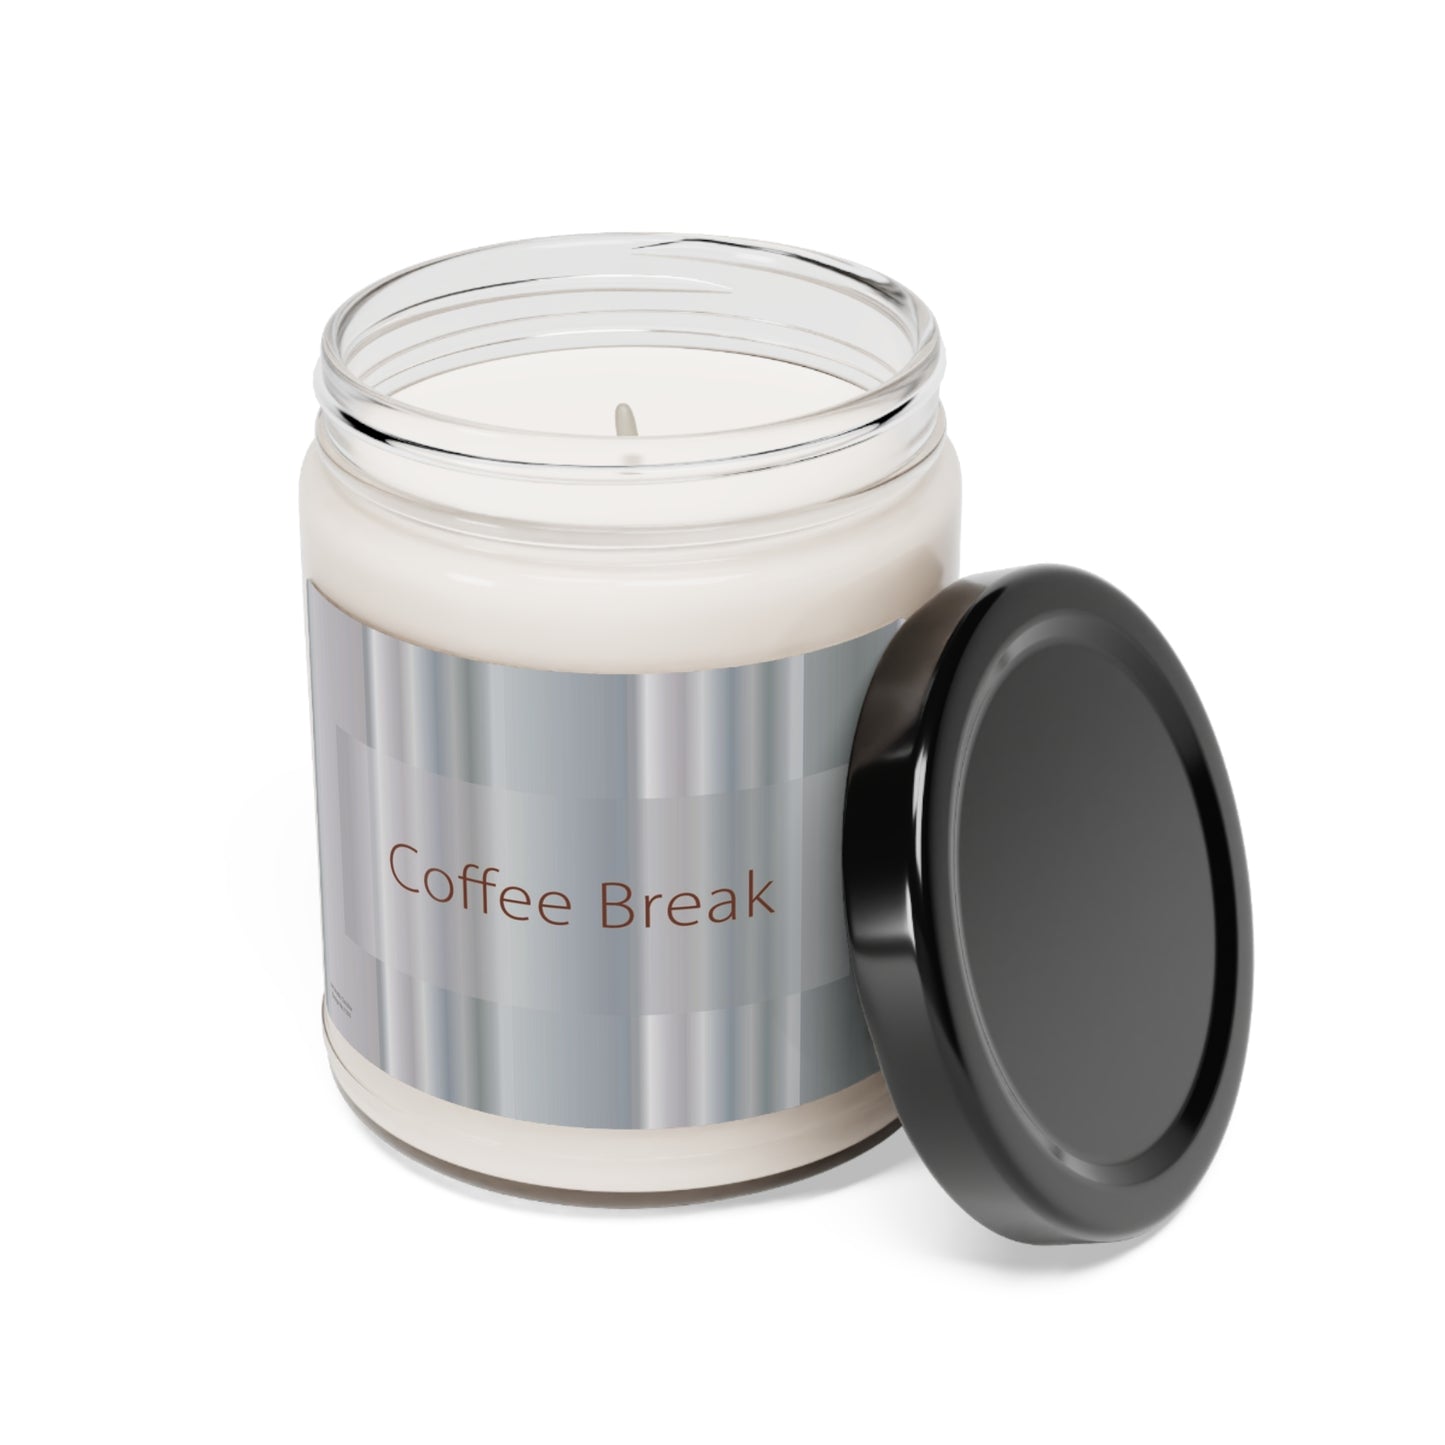 Scented Soy Candle, 9oz Coffee Break - Design No.1500